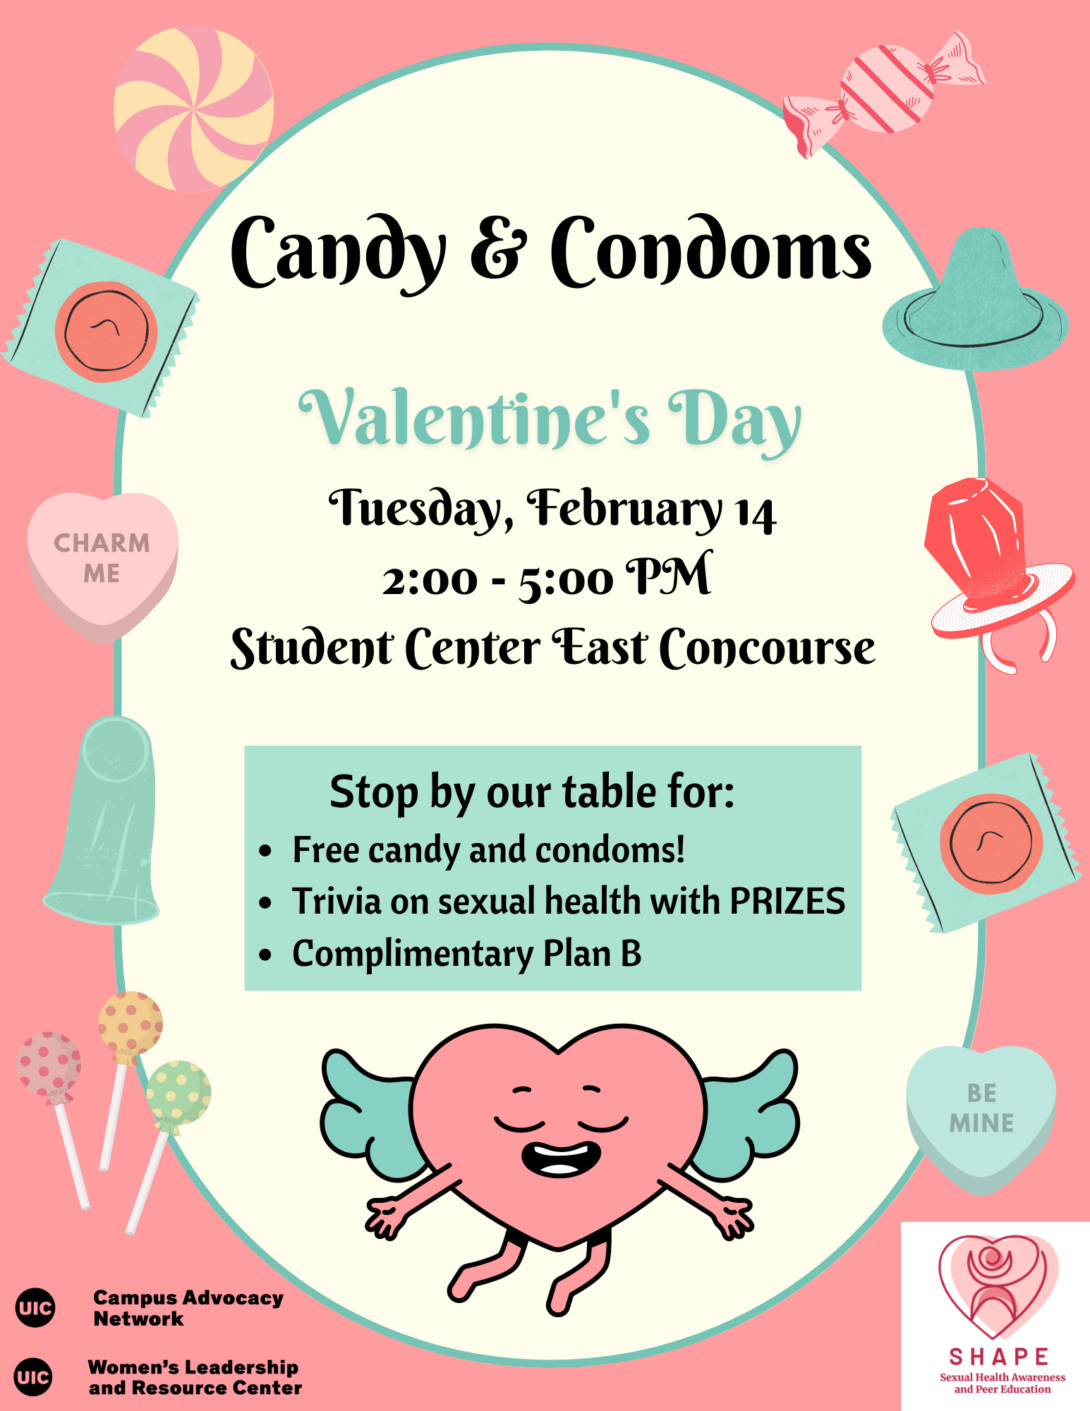 Promotional poster: Condoms and Valentine's candy on a pink background, surrounding black and mint green text describing the event, on an off-white background. At the bottom is a smiling heart with wings and outstretched arms and legs. Below that are the co-sponsor logos.